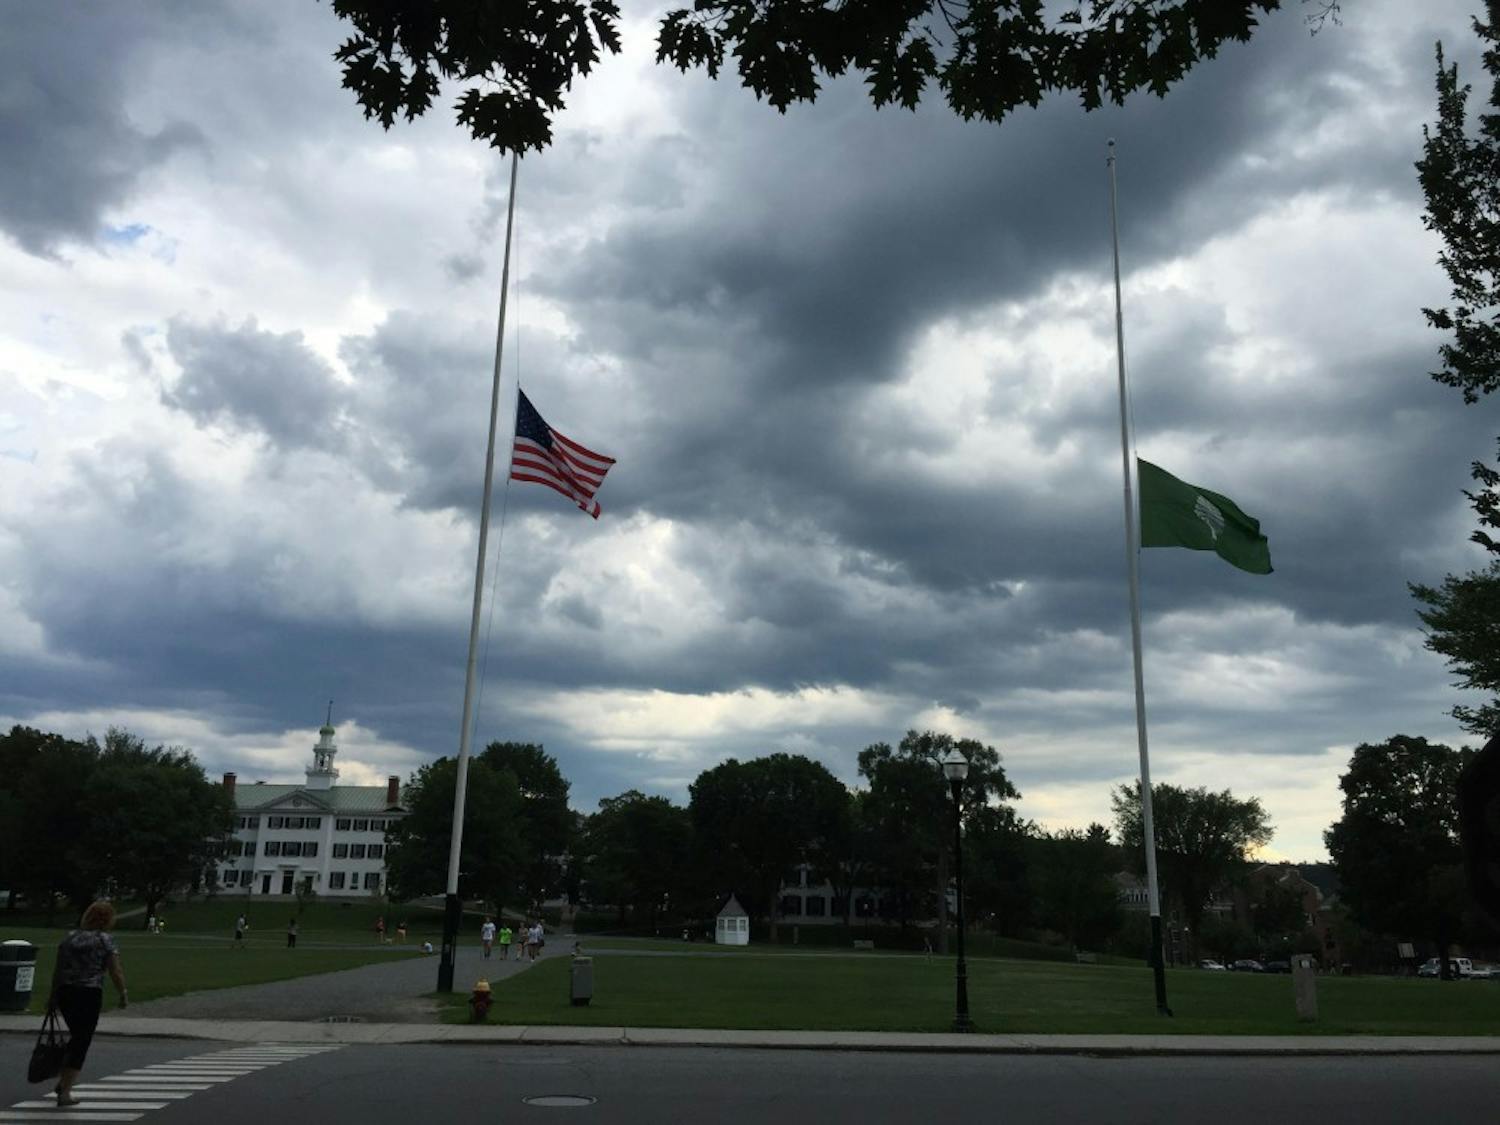 The College lowered its flags to half-mast in memory of Summer Hammond '17, who died Monday.